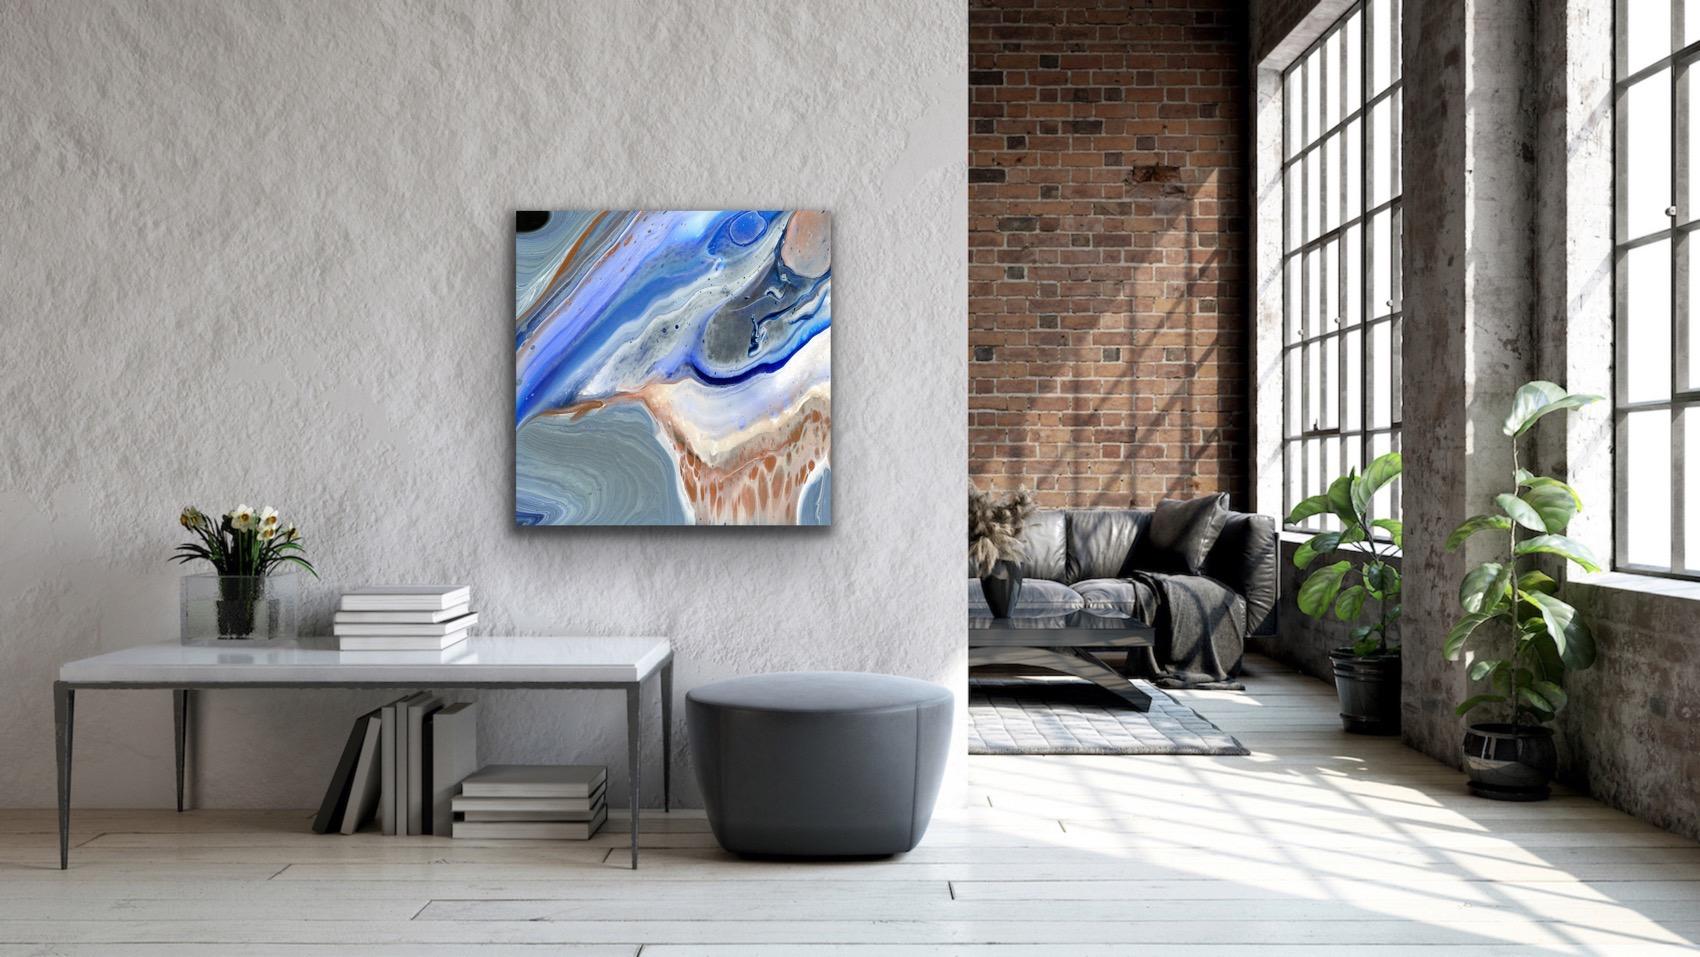 Modern Wall Art, Geode Inspired Giclee Print, Limited Edition Signed by Artist - Gray Abstract Print by Celeste Reiter